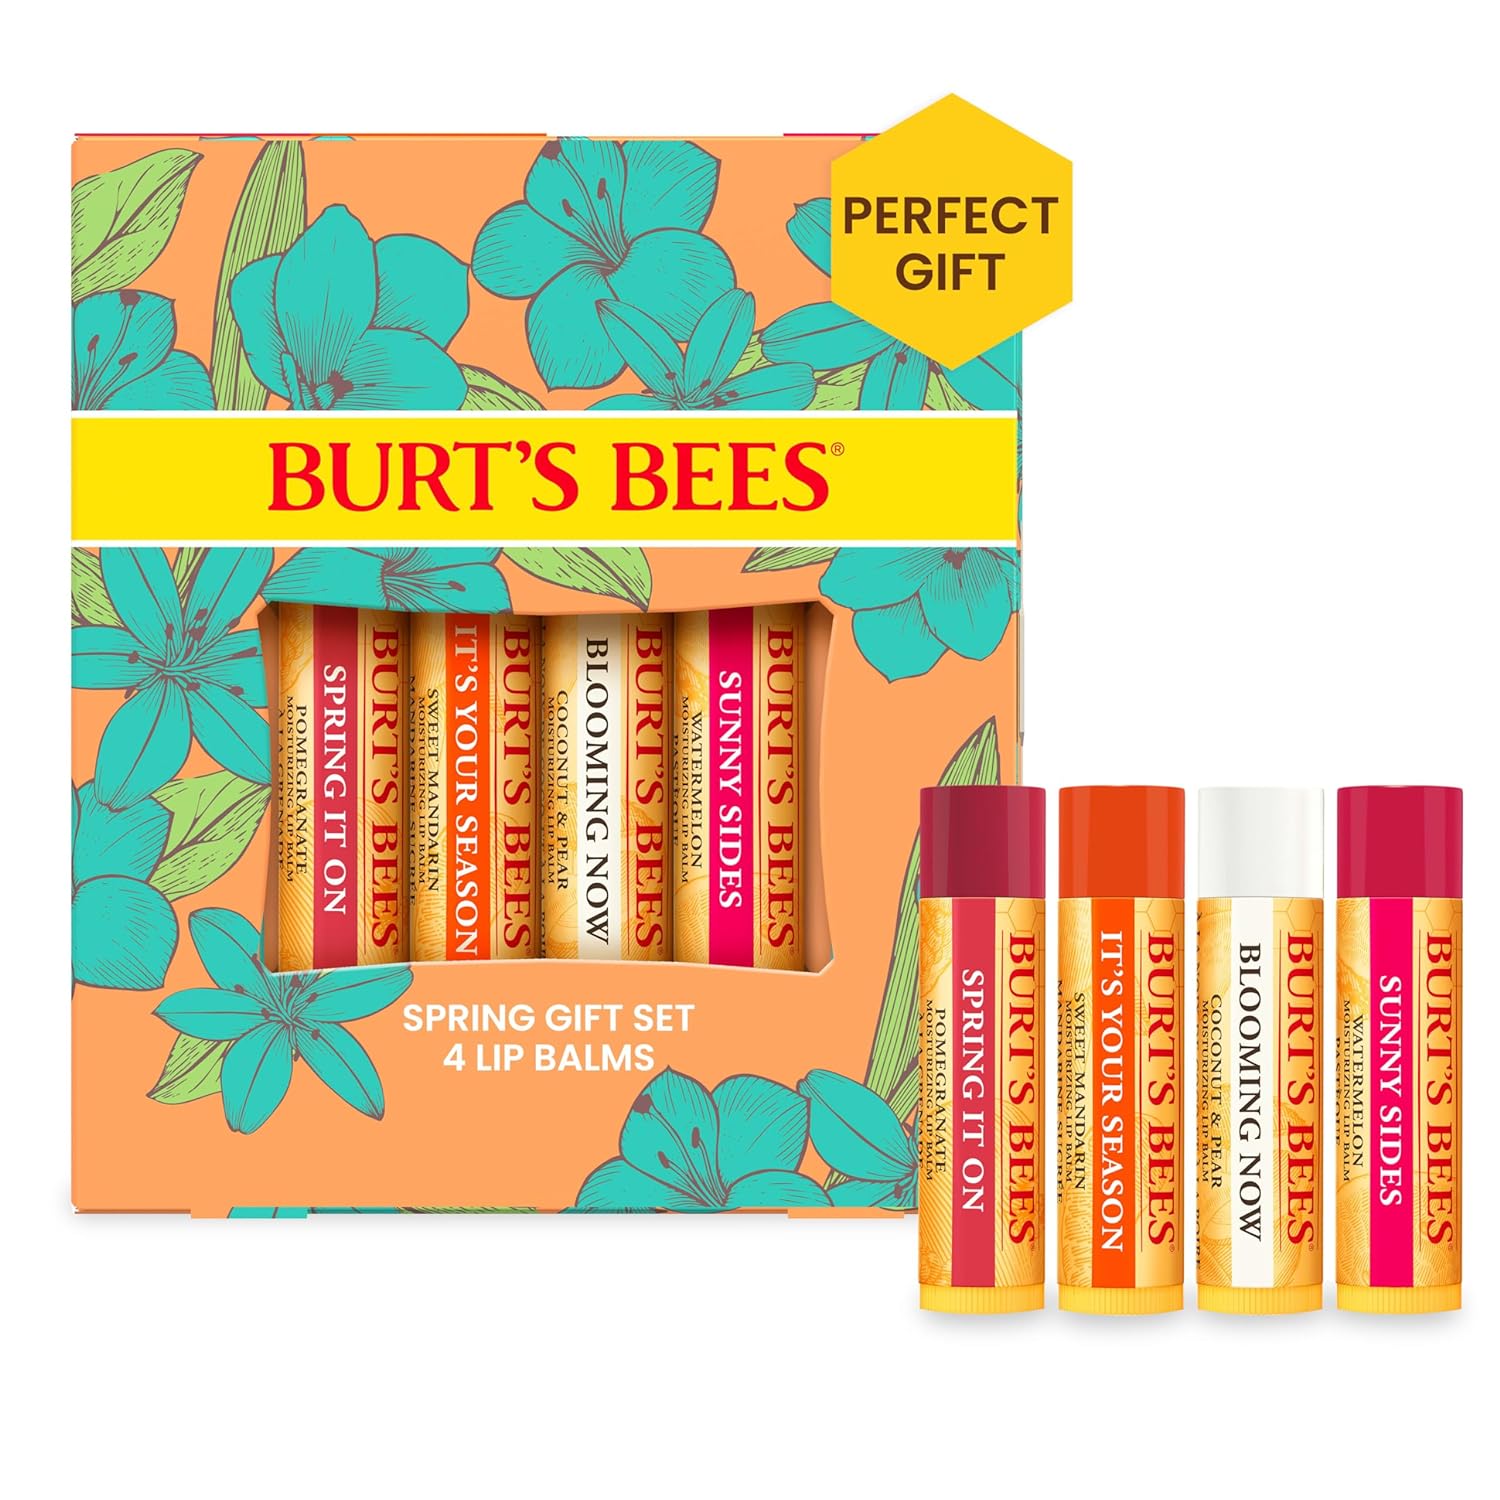 Burt's Bees Lip Balm Mothers Day Gifts for Mom - Just Picked Set, Pomegranate, Watermelon, Sweet Mandarin, Coconut & Pear, Natural Origin Lip Treatment With Beeswax, 4 Tubes, 0.15 oz